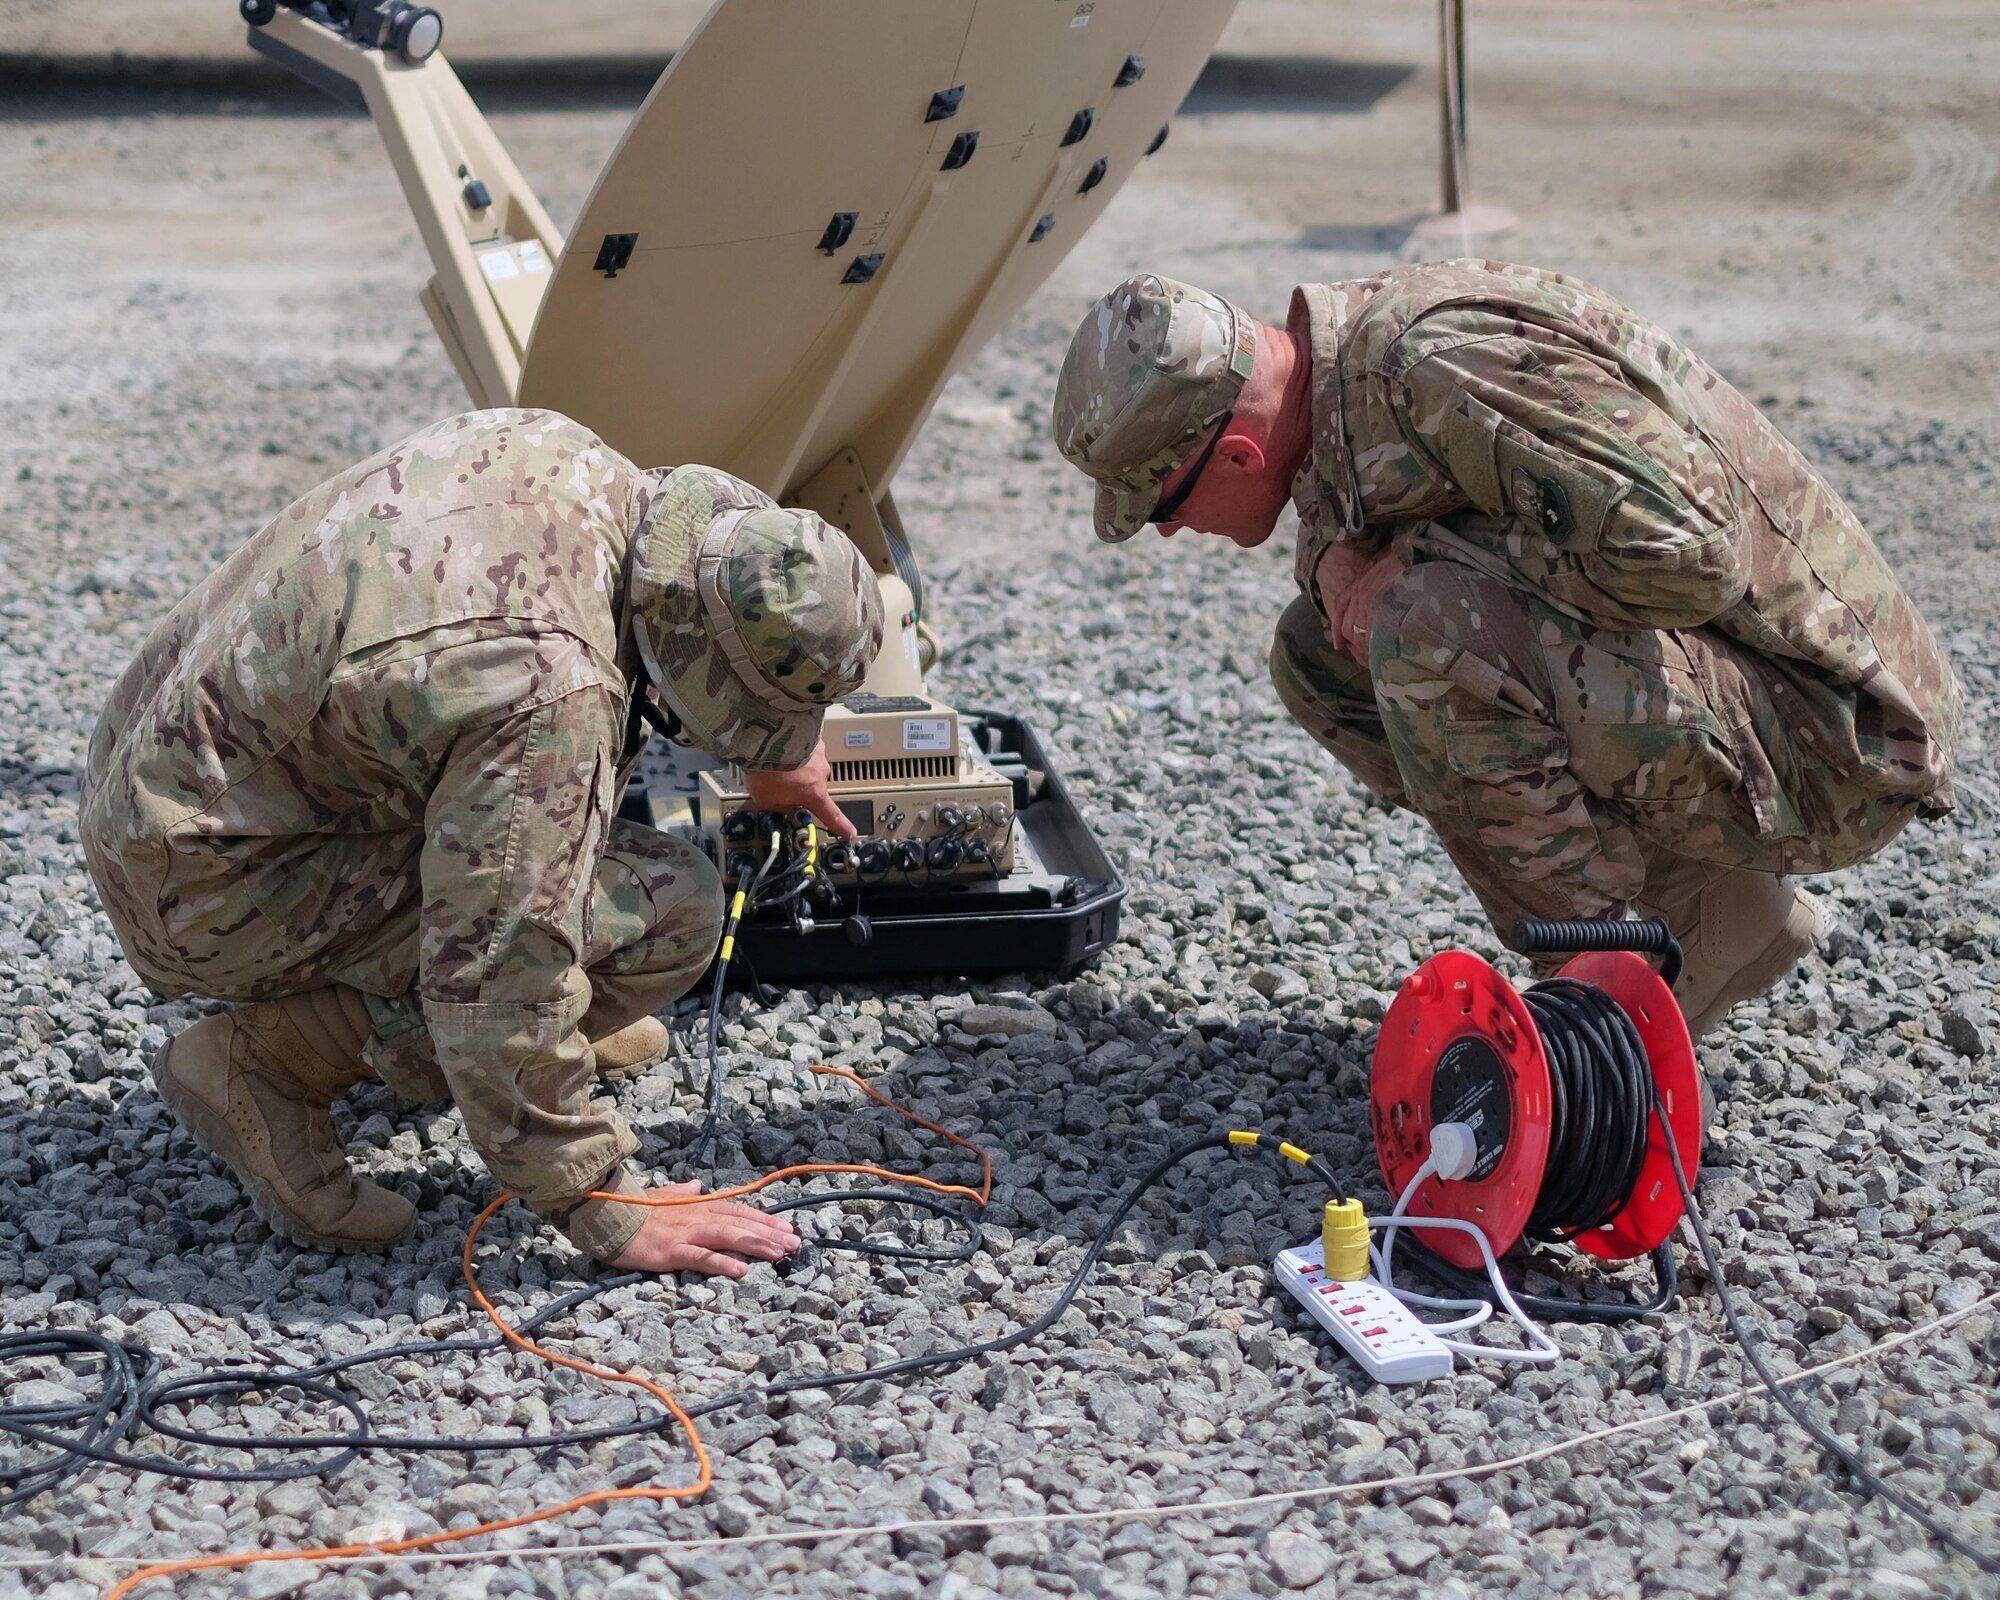 Senior Airman Joseph, left, 380th Expeditionary Communication Squadron radio frequency transmissions systems Communications Fly-away Kit 30 team lead, , examines a Communications Fly-Away Kit, explaining the Hawkeye’s readings and controls to Col. Dee Jay Katzer, 380th Expeditionary Mission Support Group commander, June 27, 2017, at undisclosed location in southwest Asia. Base leadership received hands-on experience with CFKs to better understand their capabilities. This information helps commanders make better use of the kits and Airmen in the future. (U.S. Air Force photo by Senior Airman Preston Webb)